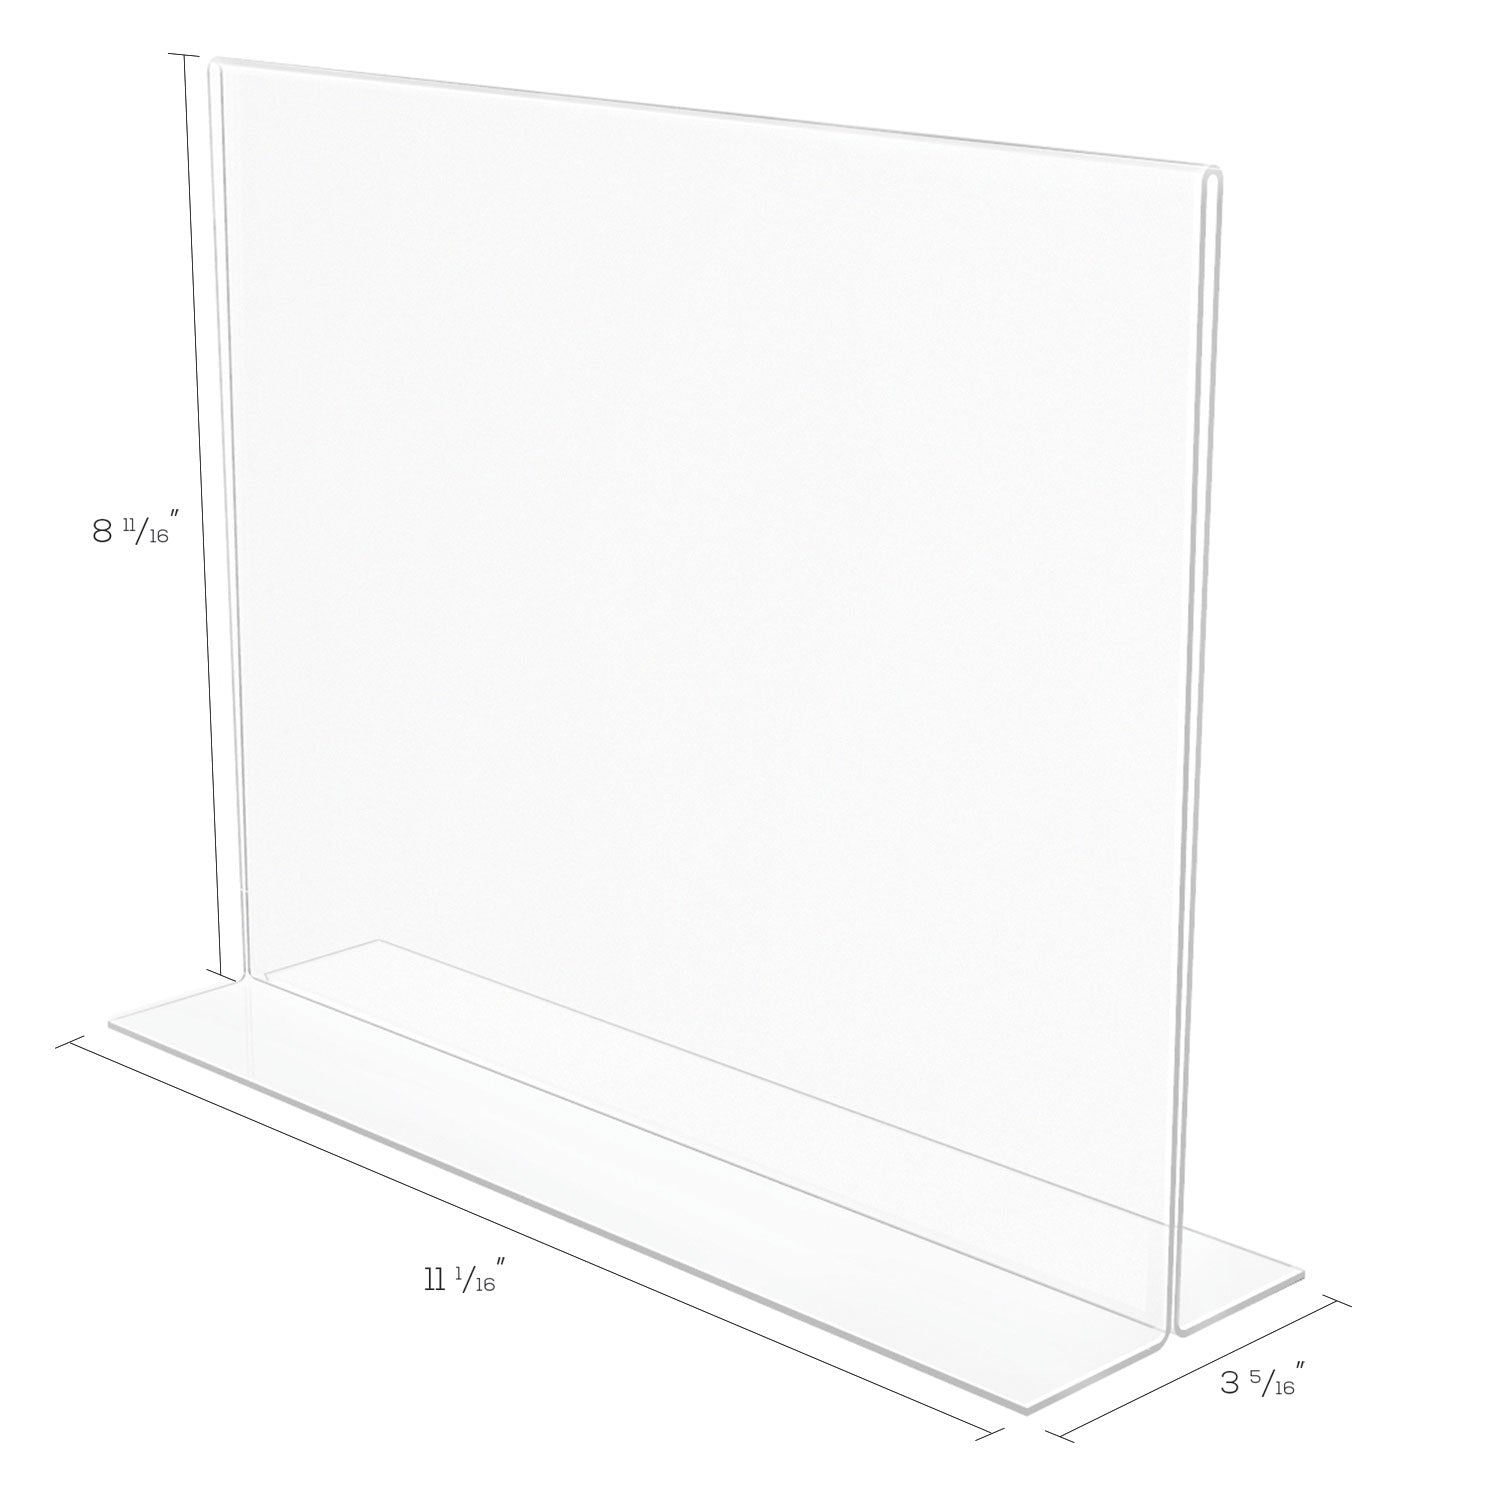 Anti-Glare Stand Up Double Sided Sign Holder, 8.5 x 11, Clear - 